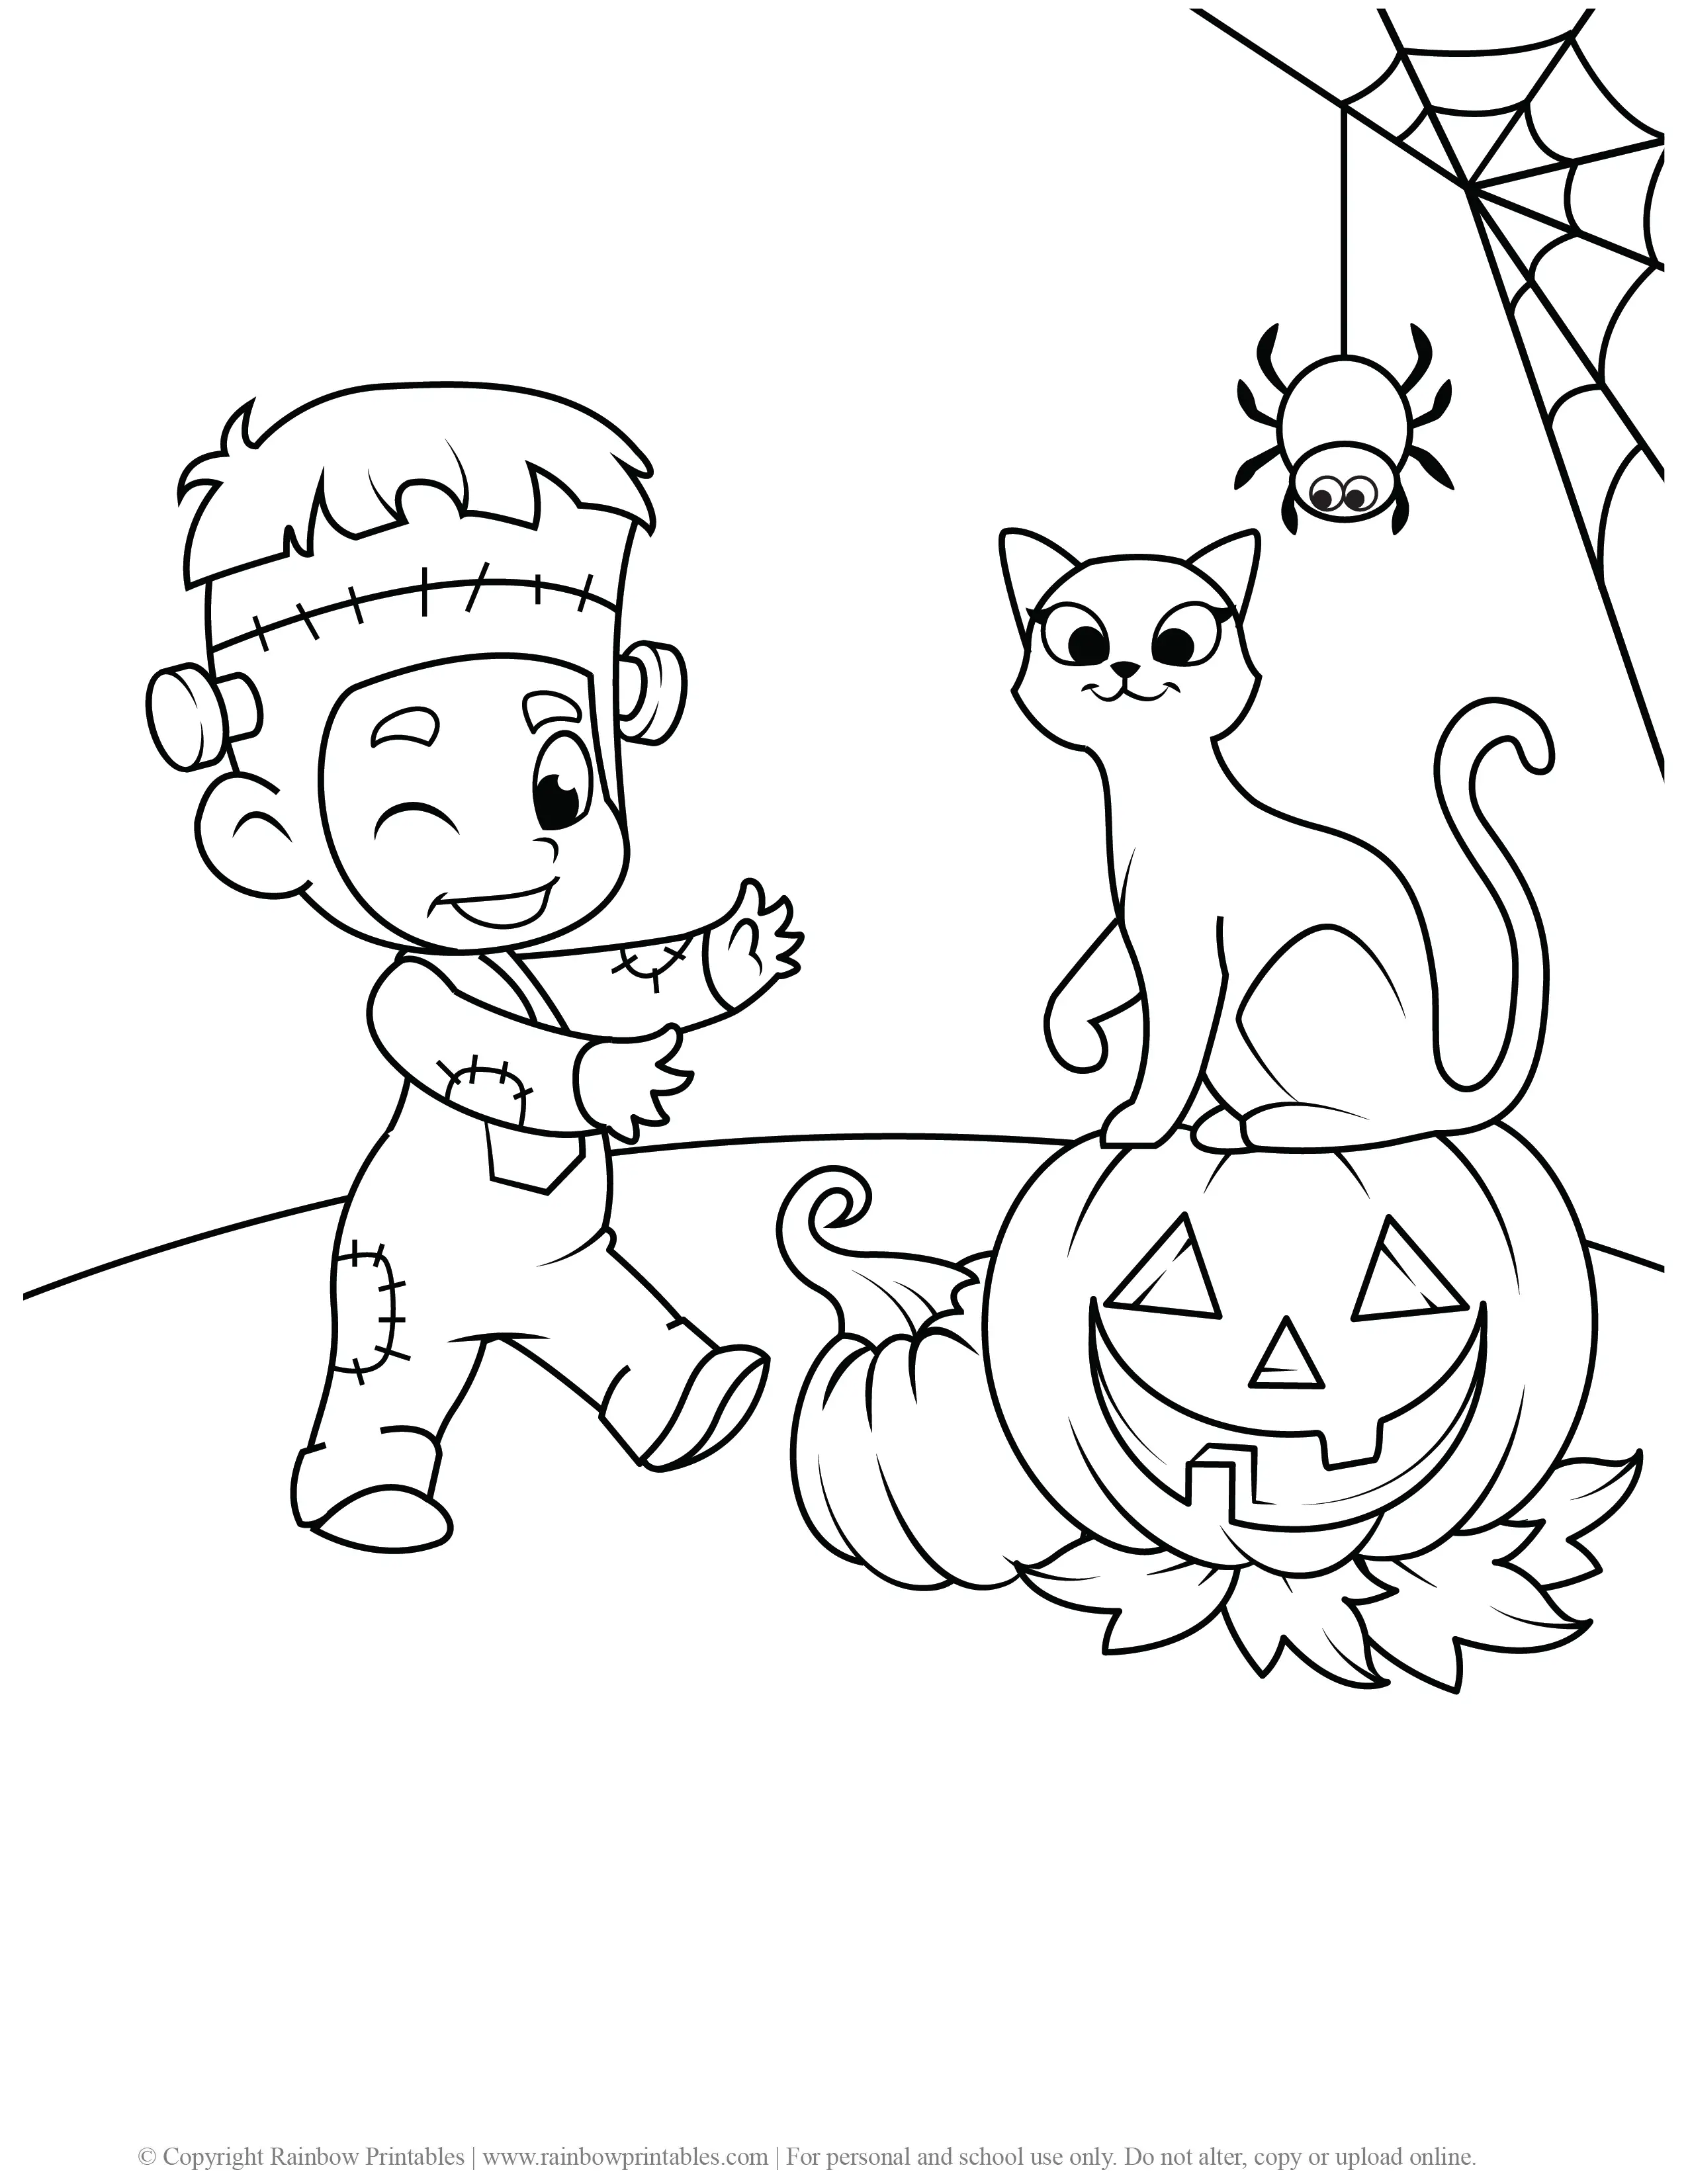 Cute Halloween Coloring Pages - Rainbow Printables